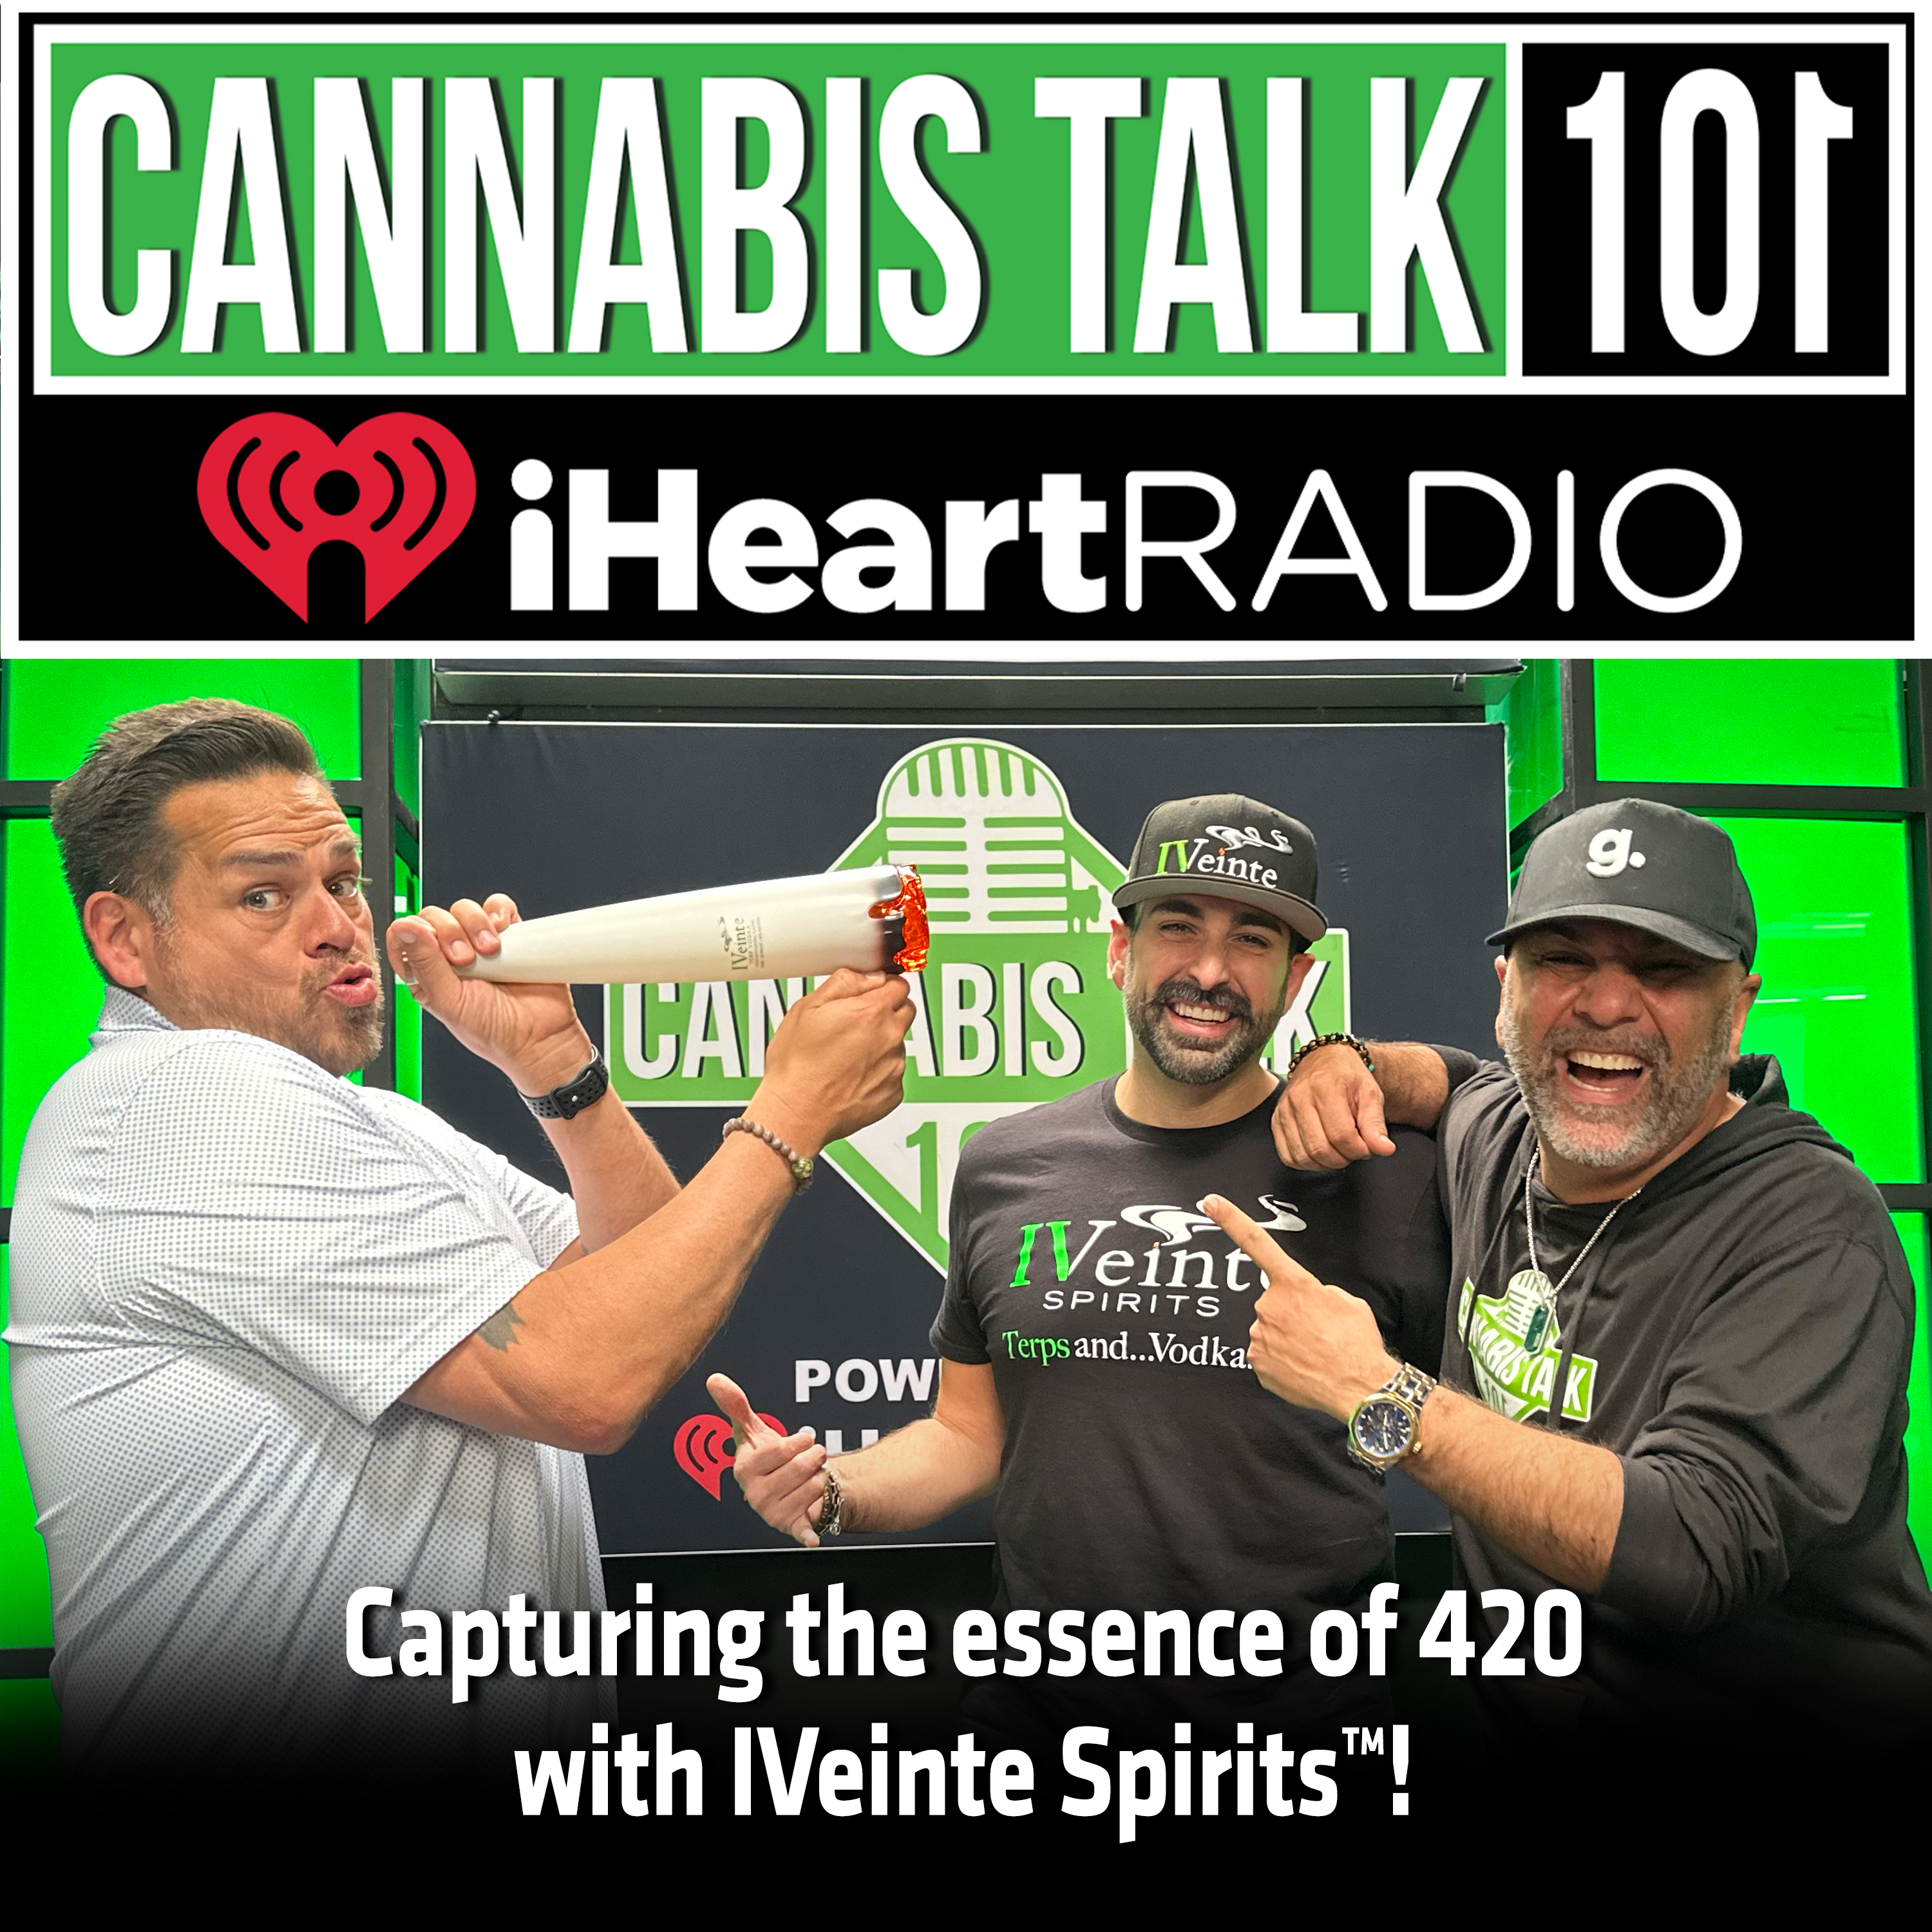 Capturing the essence of 420 with IVeinte Spirits™!